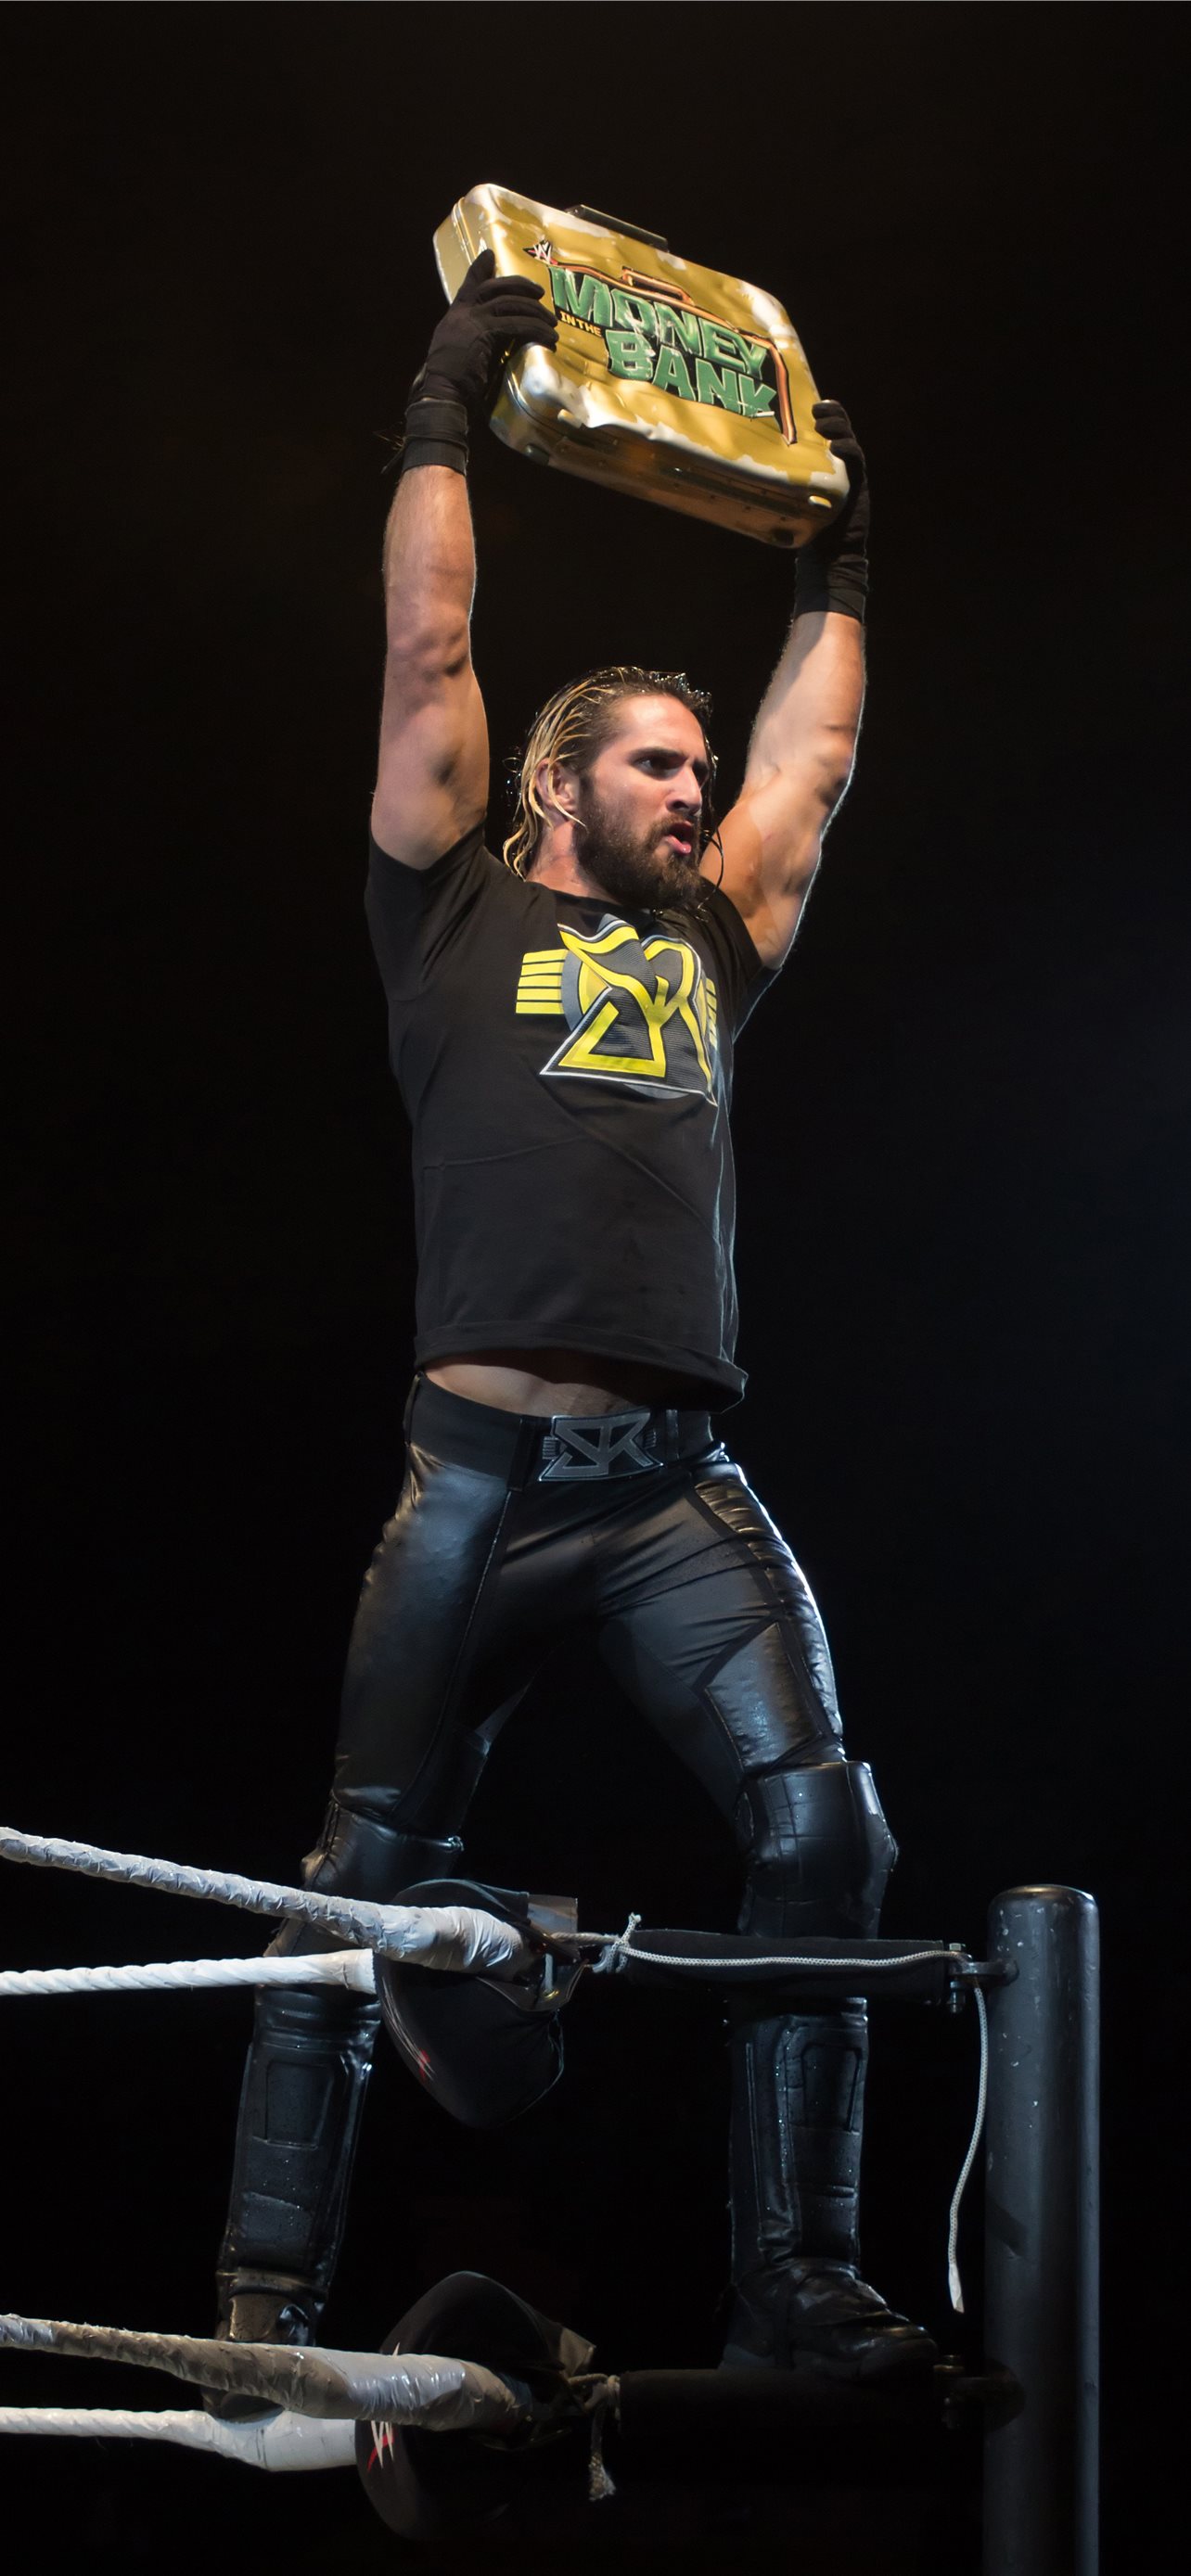 1920x1200 / 1920x1200 seth rollins wallpaper for computer -  Coolwallpapers.me!